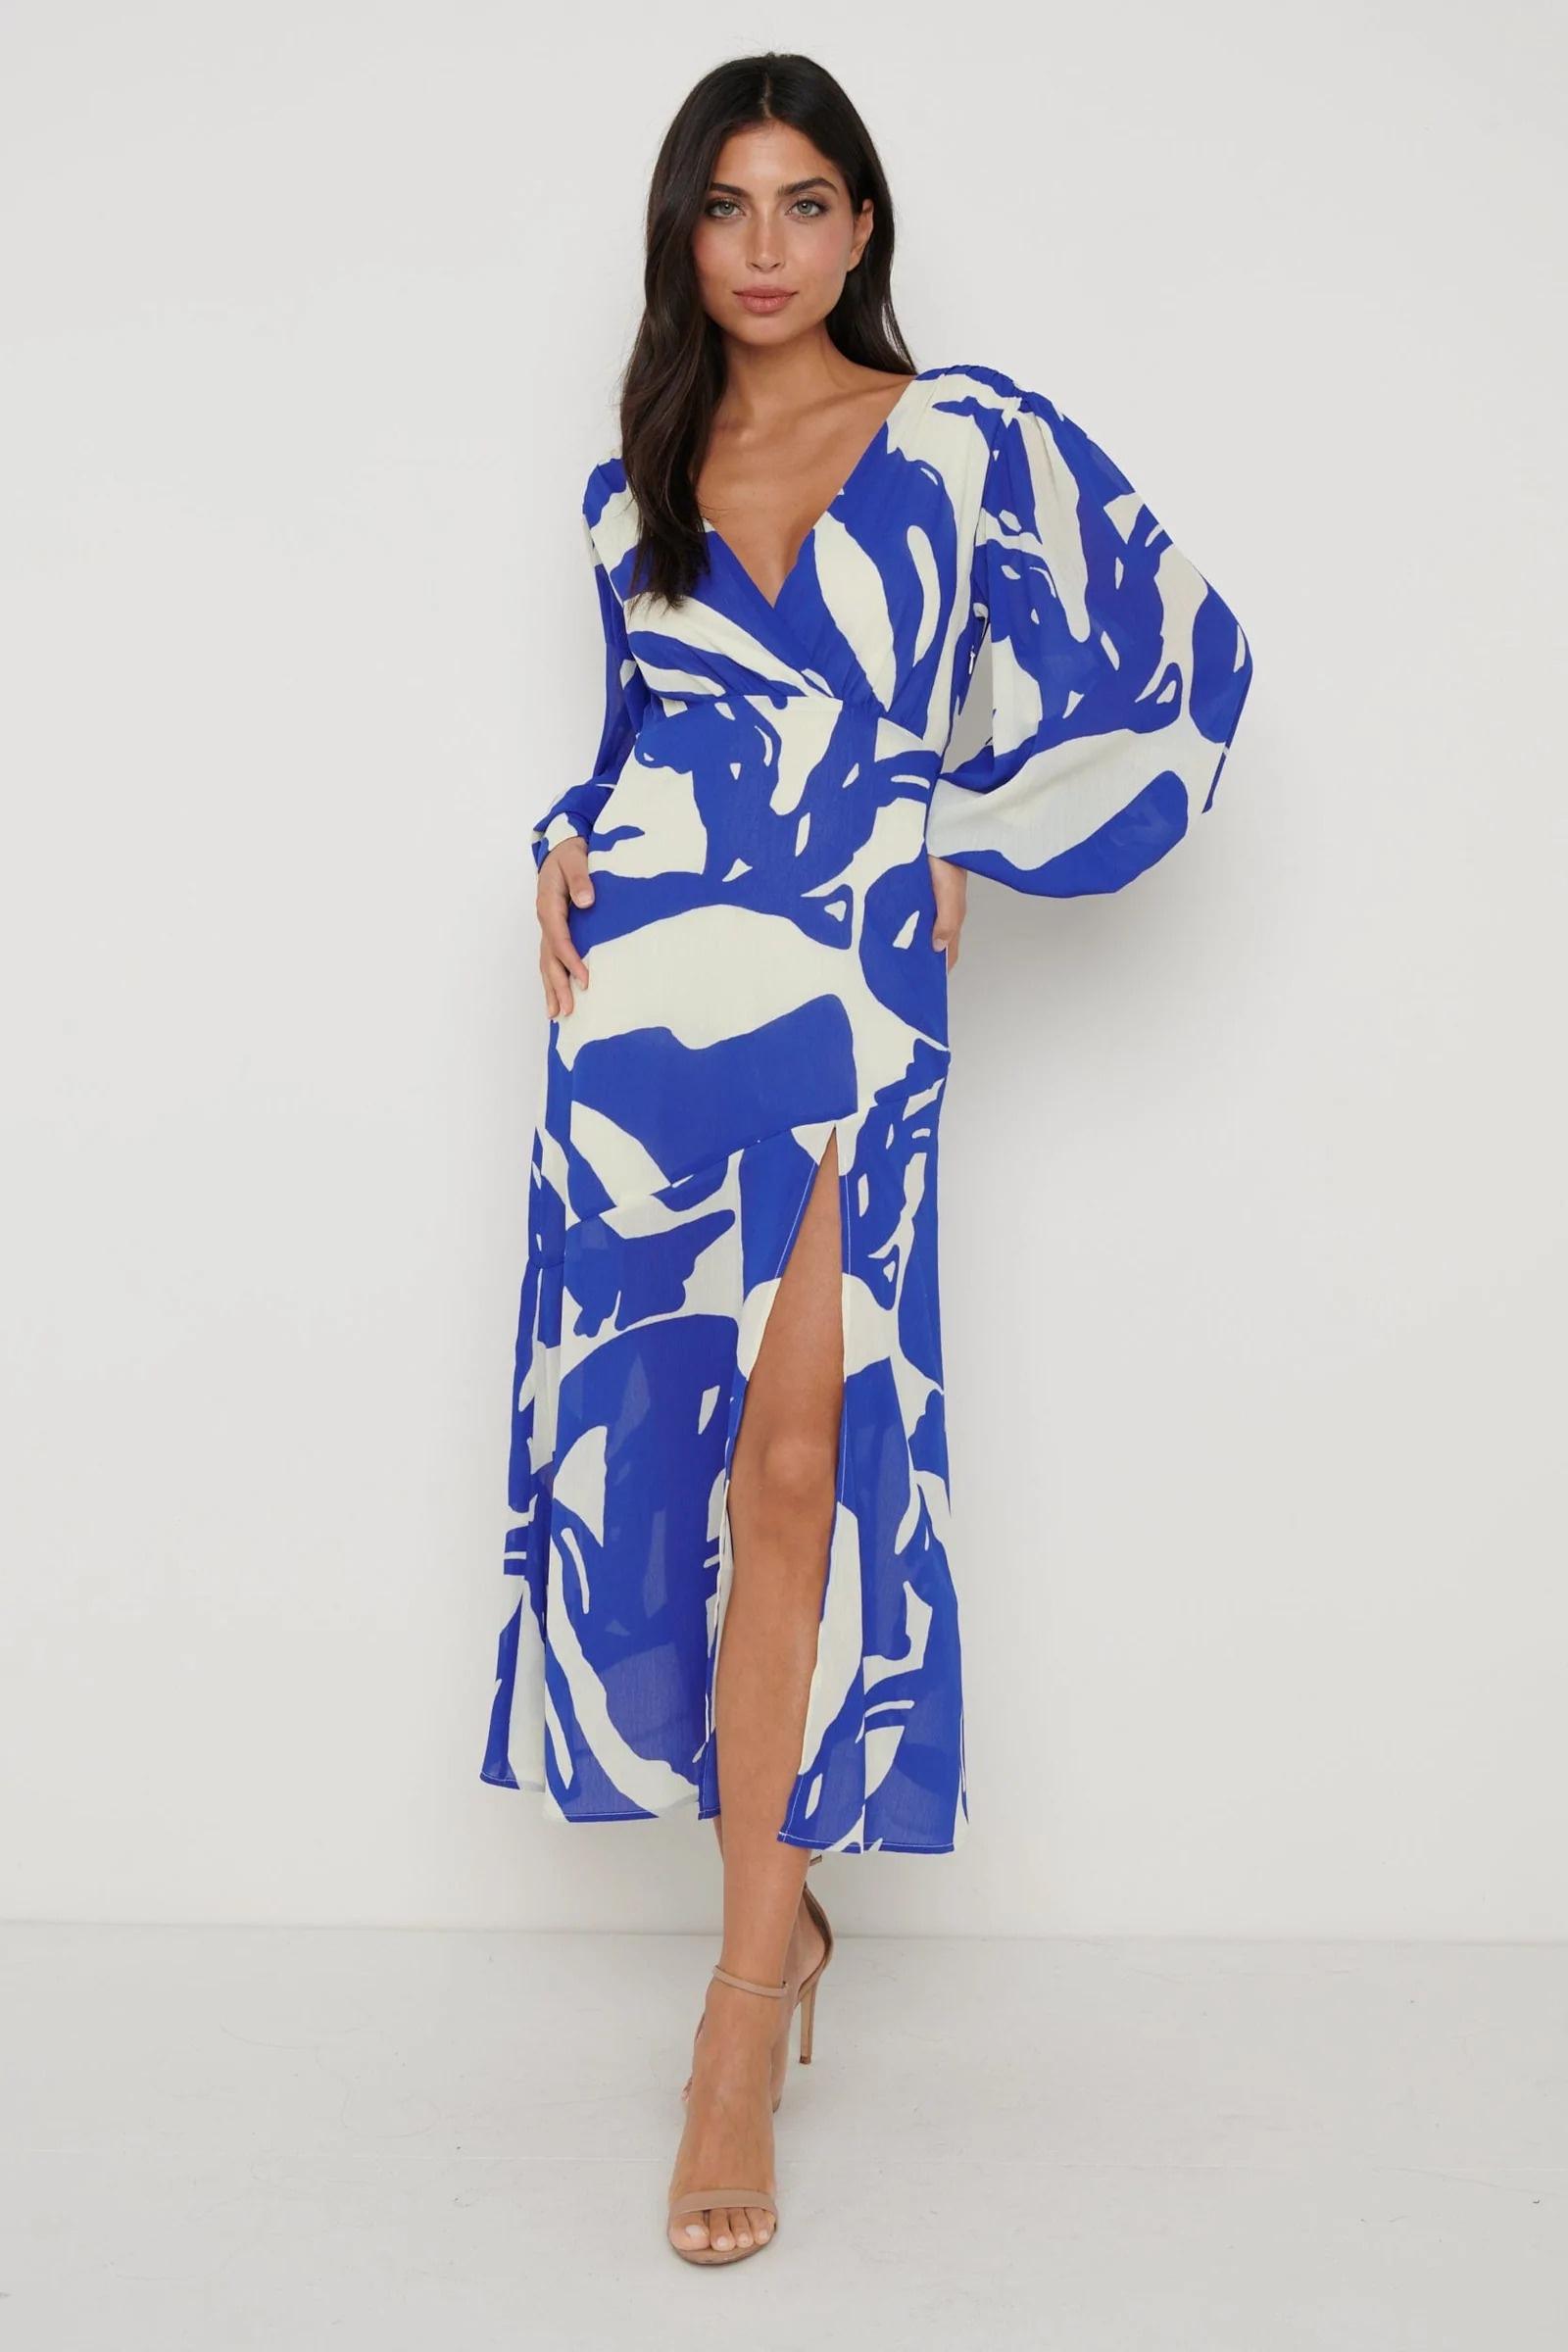 40 Chic Winter Wedding Guest Dresses for Every Budget - hitched.co.uk ...